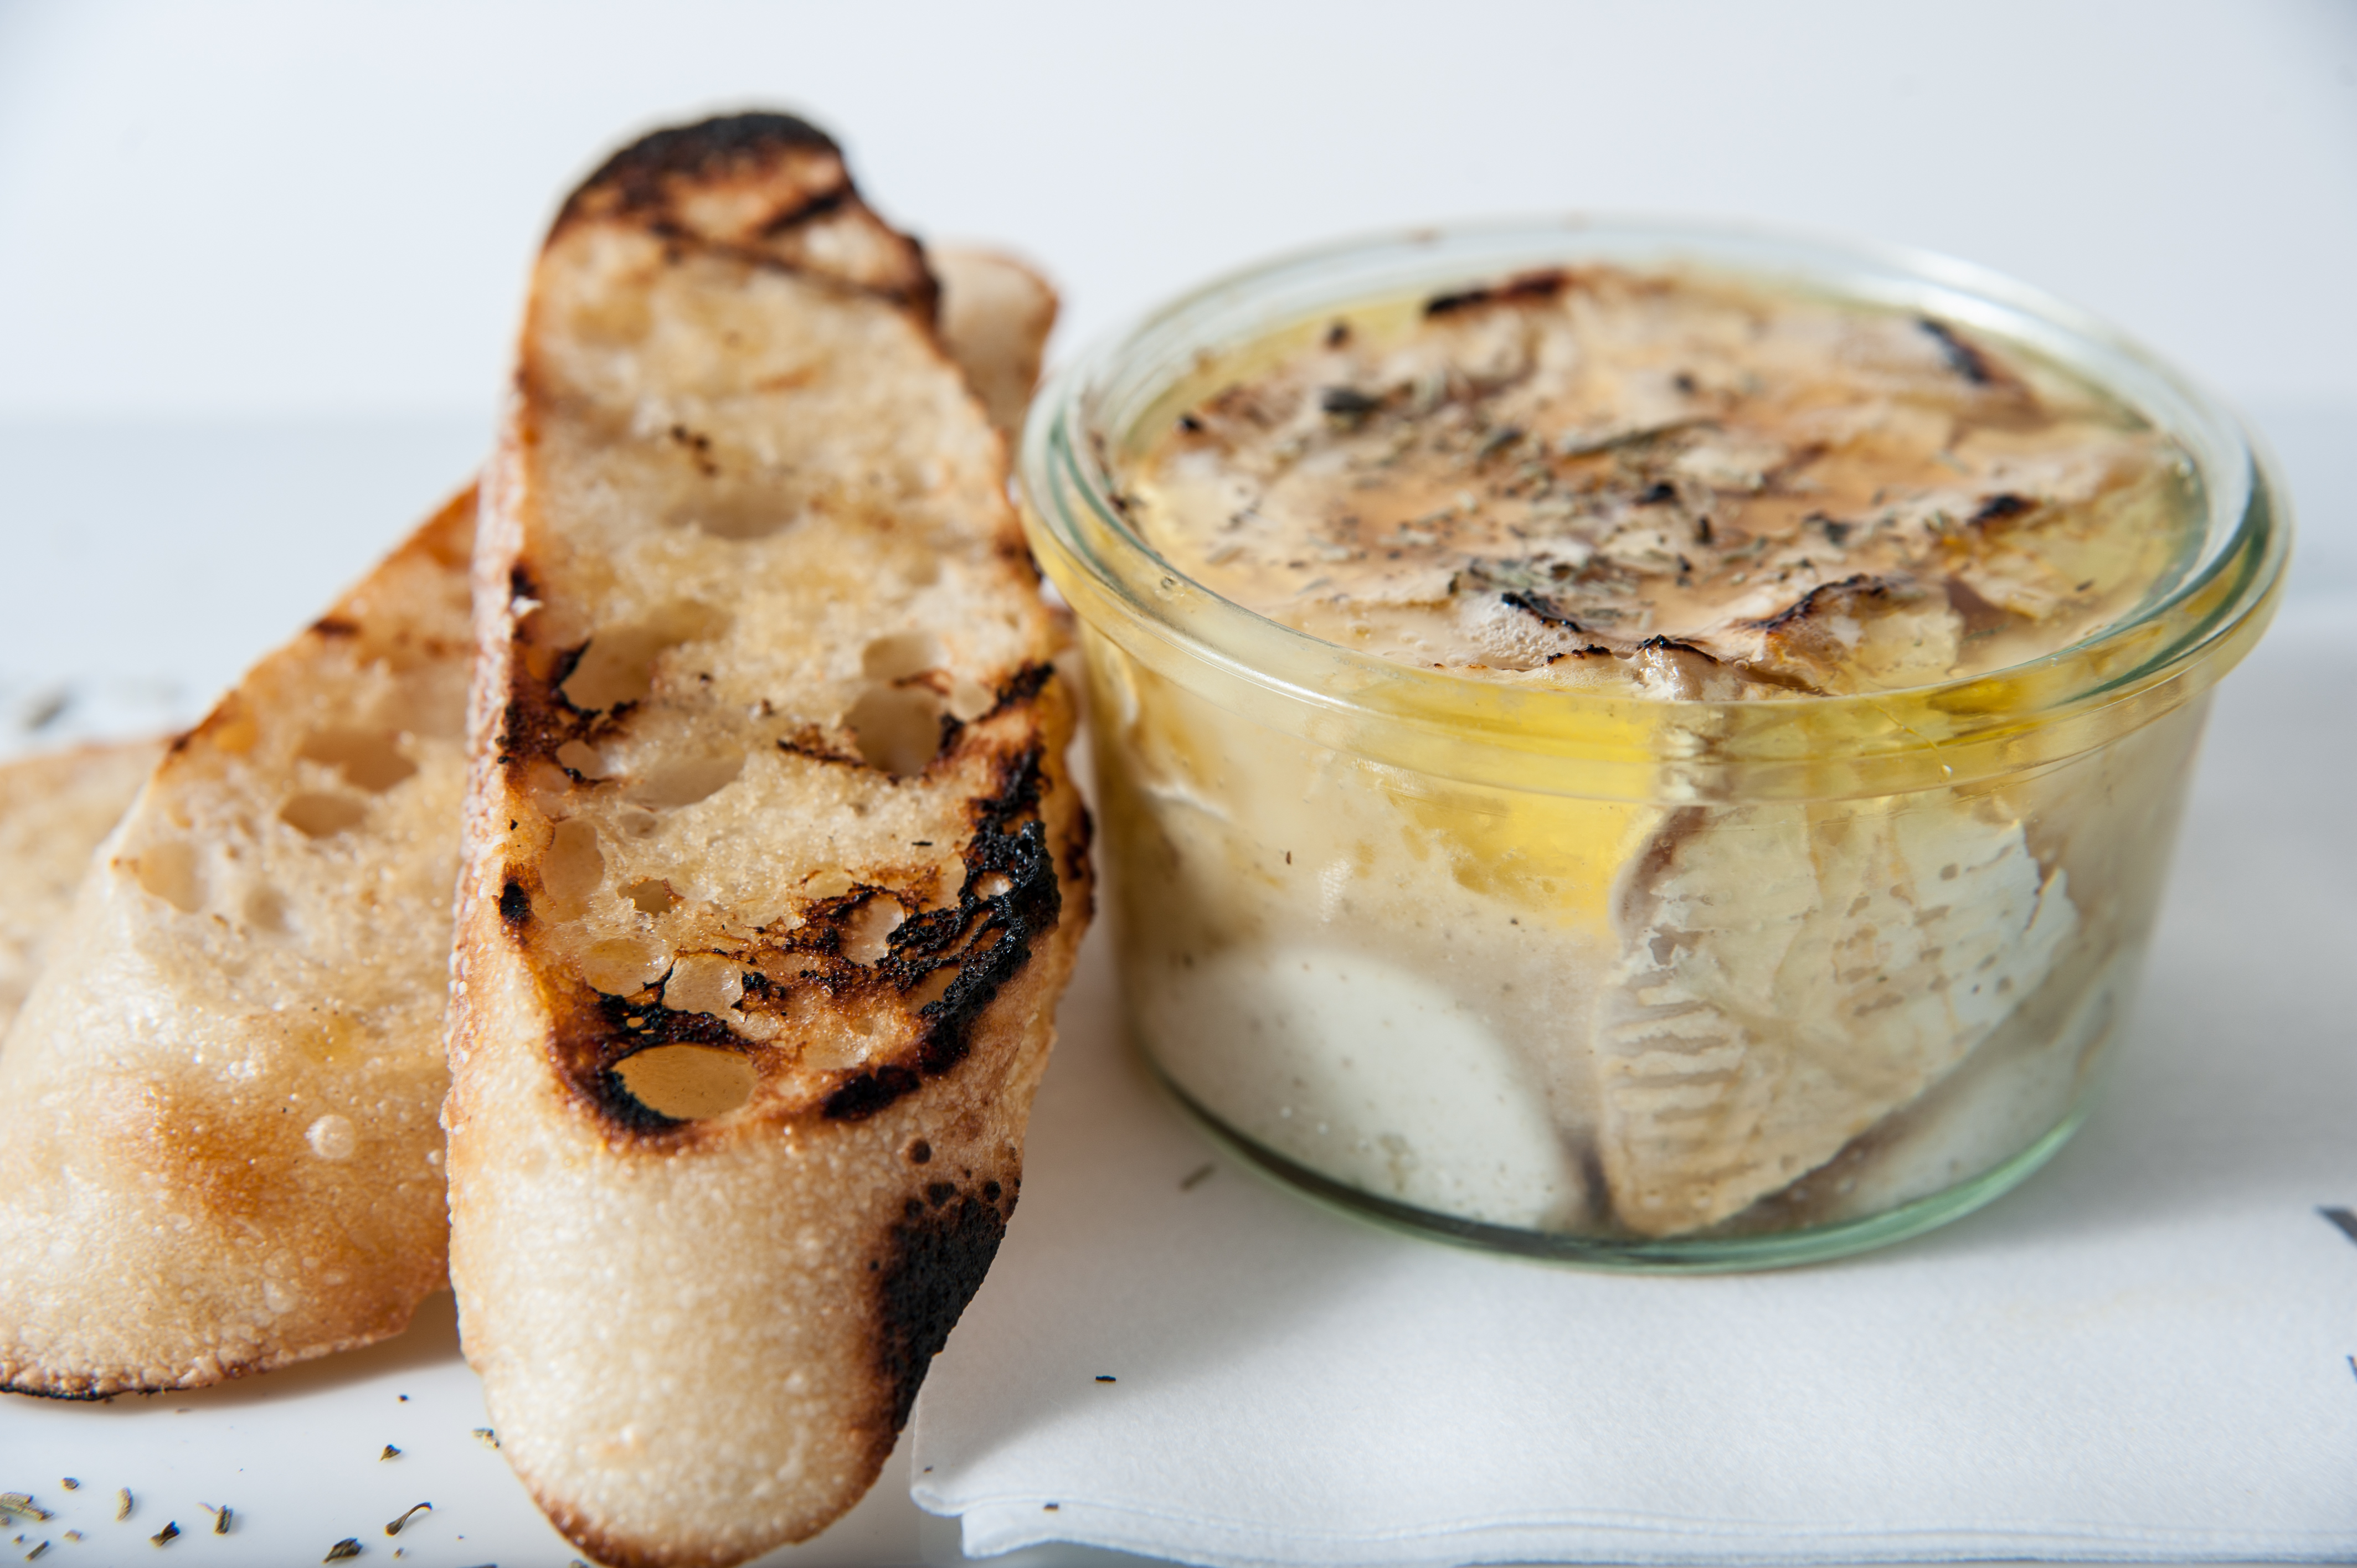 Herb de Provence Baked Goat Cheese